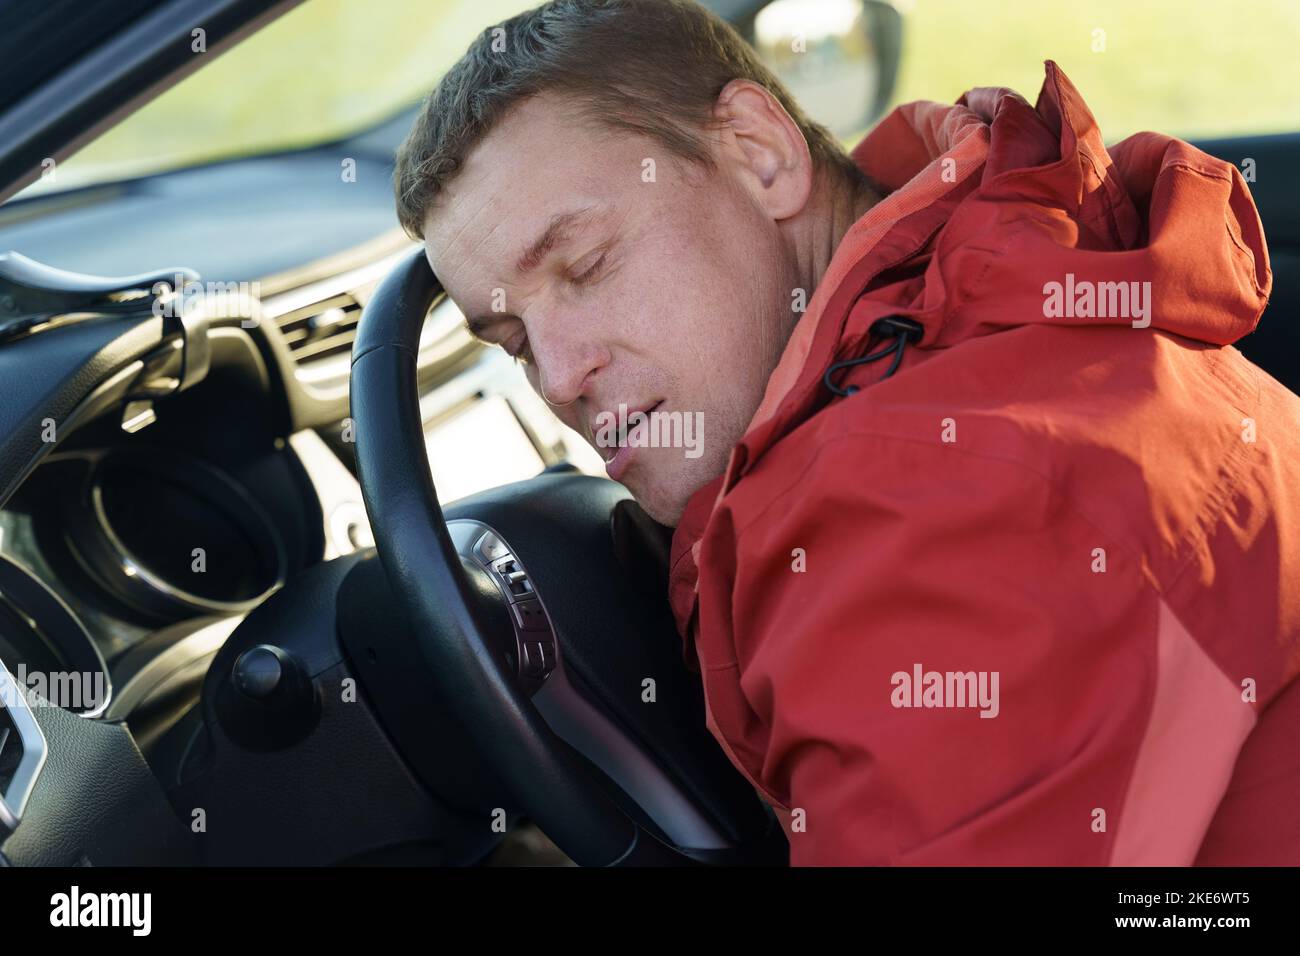 The tired driver sleeps in the car with his head bowed on the steering wheel. Security concept. Stock Photo